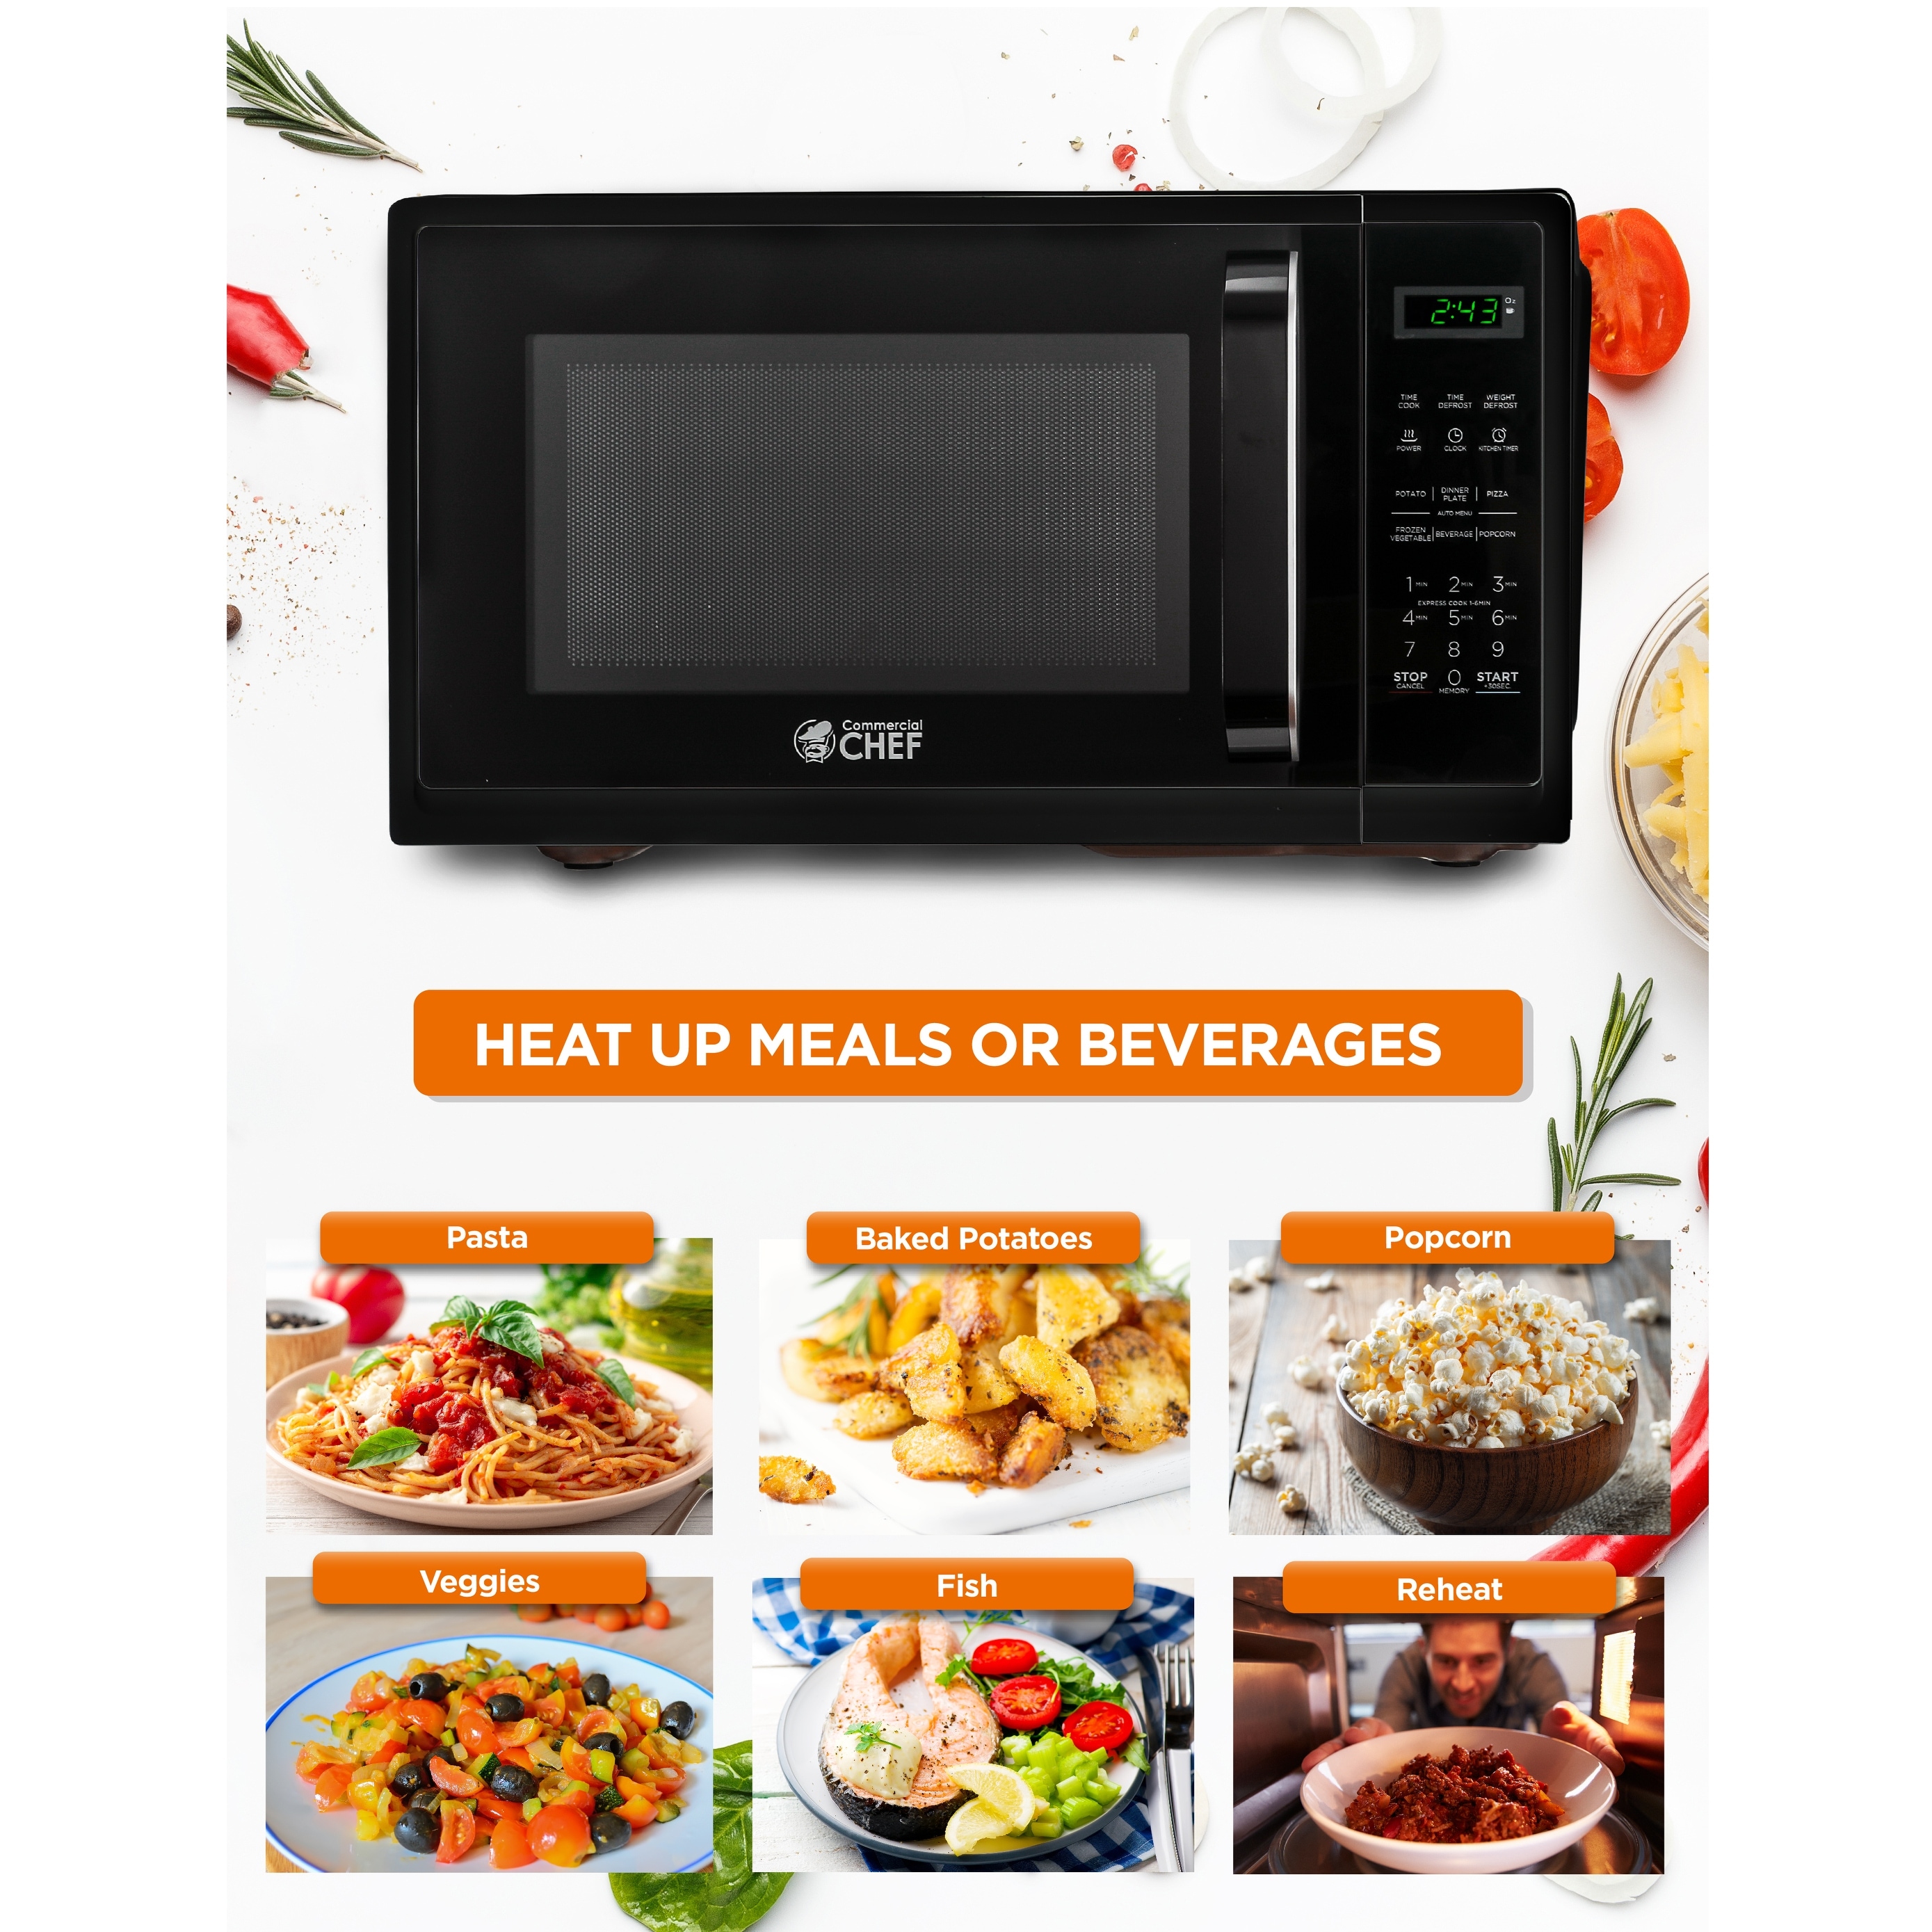 https://ak1.ostkcdn.com/images/products/is/images/direct/56369bae8552d6b6b495f594eed587c3592cdcc9/0.9-Cu.Ft-Countertop-Microwave-Oven-Black.jpg